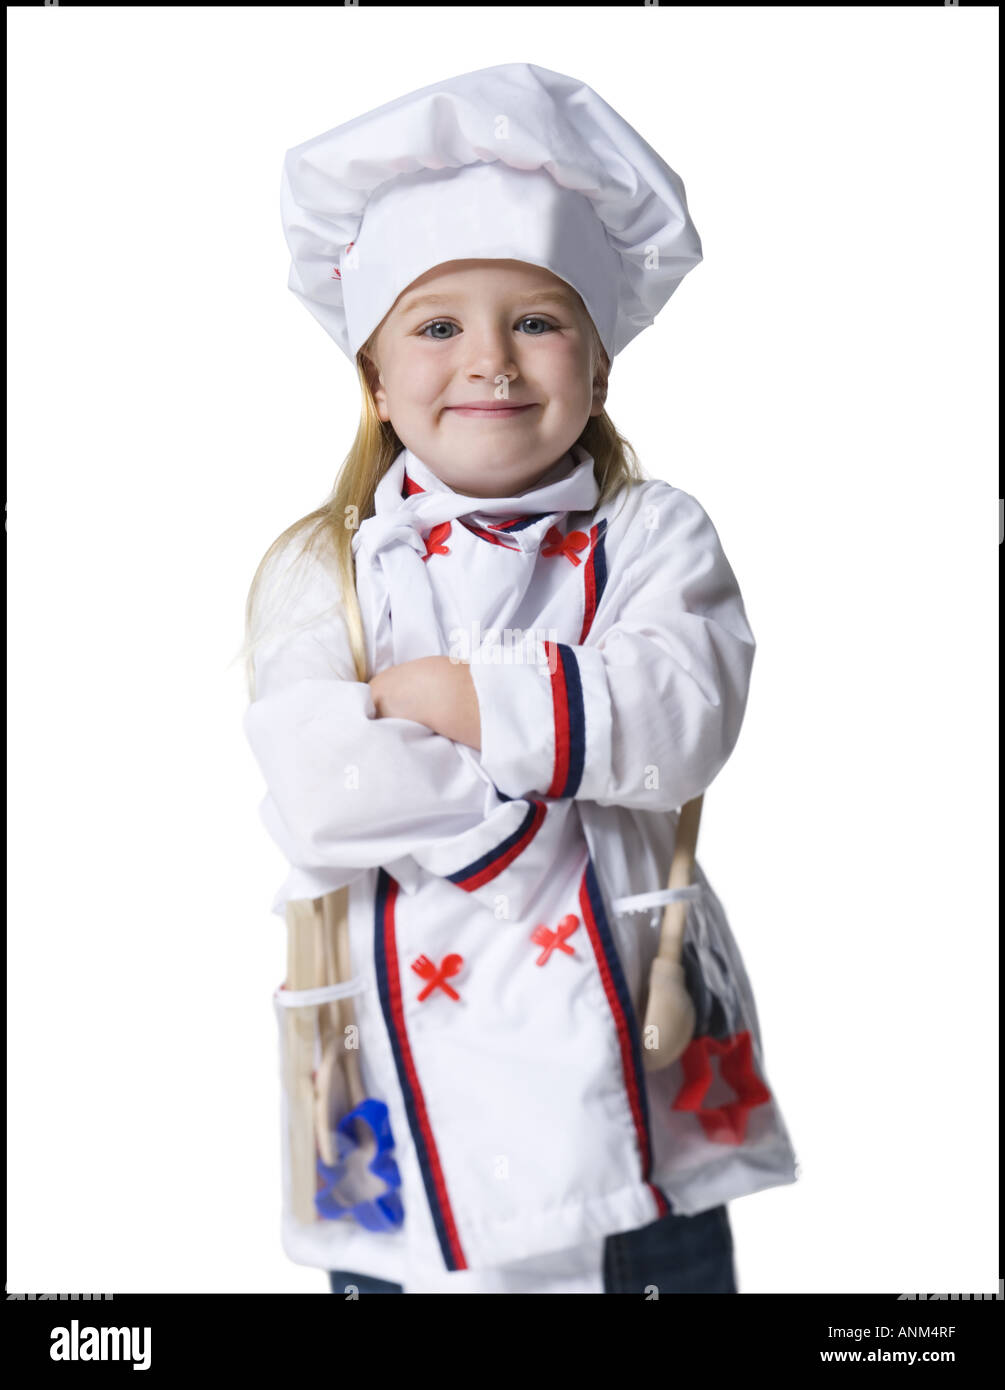 Portrait of a girl dressed as a chef Stock Photo